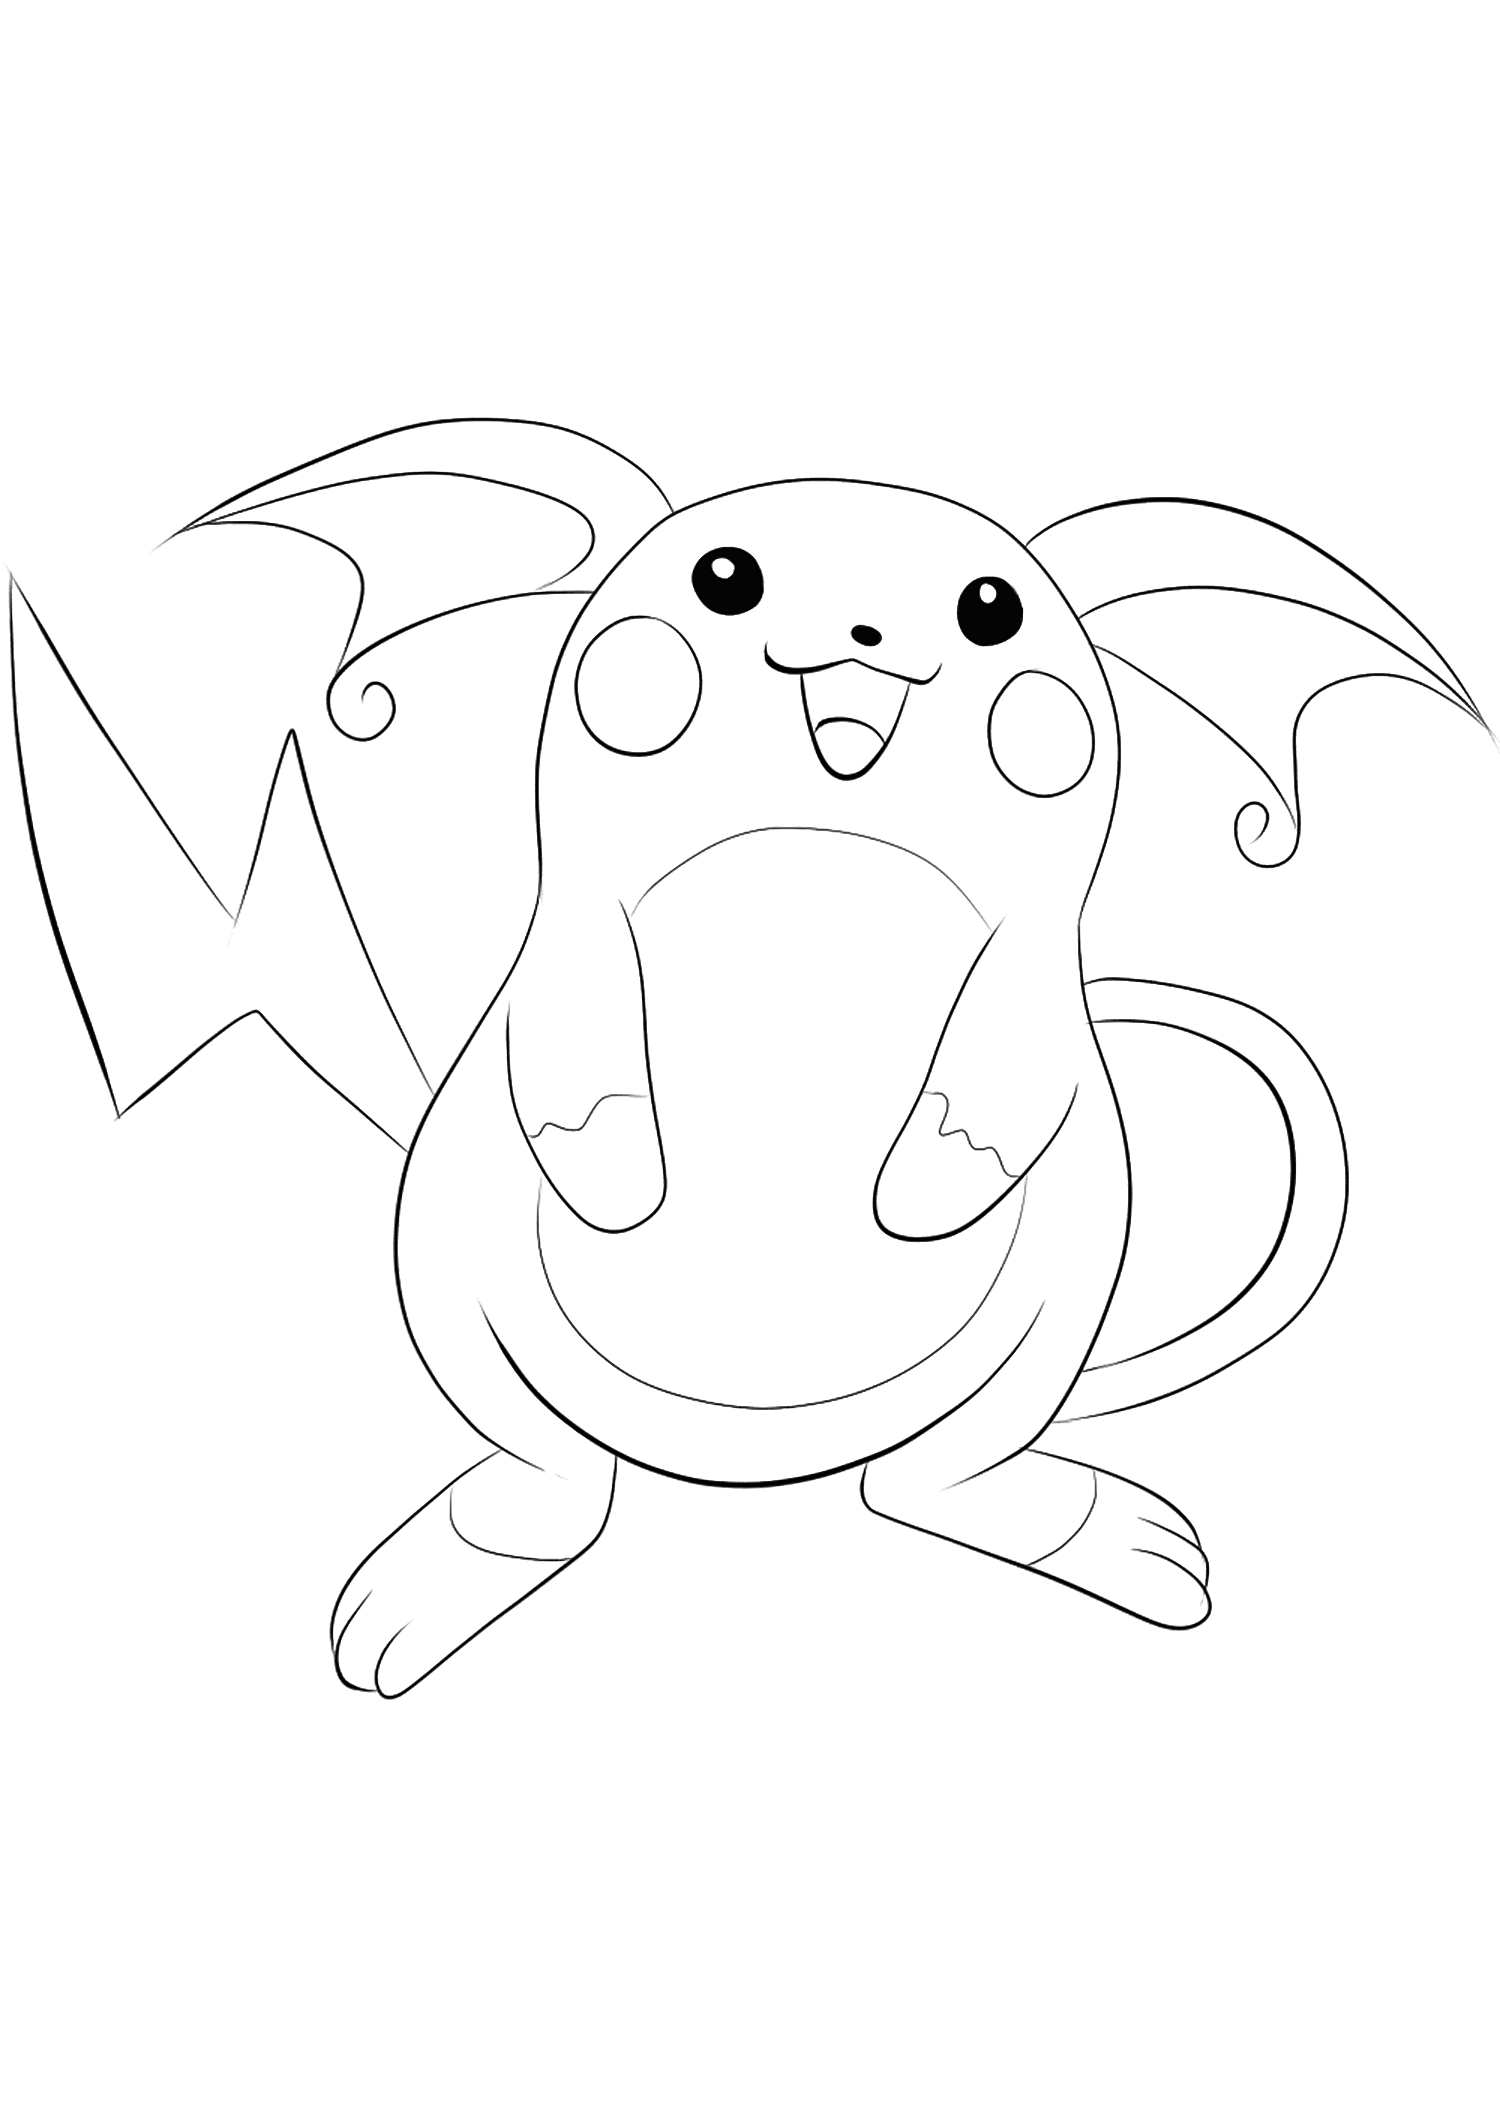 Raichu (No.26). Raichu Coloring page, Generation I Pokemon of type Electrik and PsychicOriginal image credit: Pokemon linearts by Lilly Gerbil'font-size:smaller;color:gray'>Permission: All rights reserved © Pokemon company and Ken Sugimori.